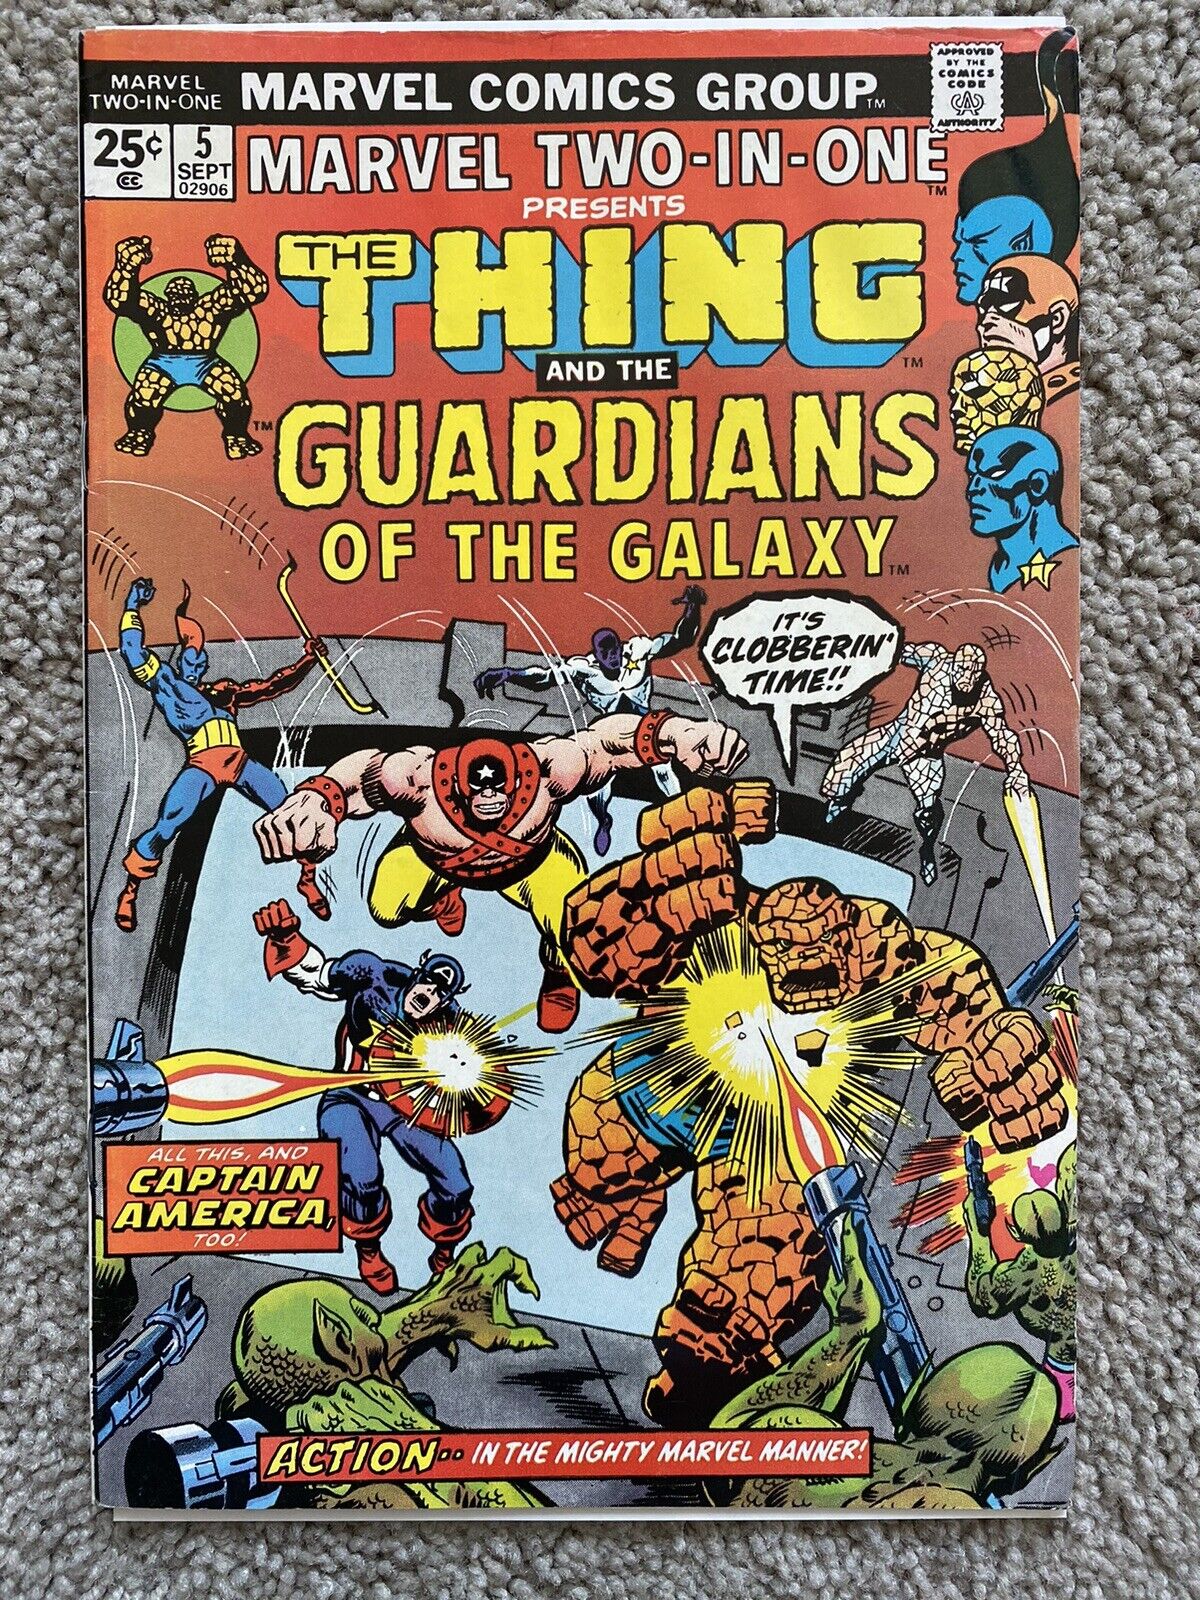 MARVEL TWO-IN-ONE #5 VG/F SEE PICS THING GUARDIANS OF GALAXY MARVEL COMICS 1974